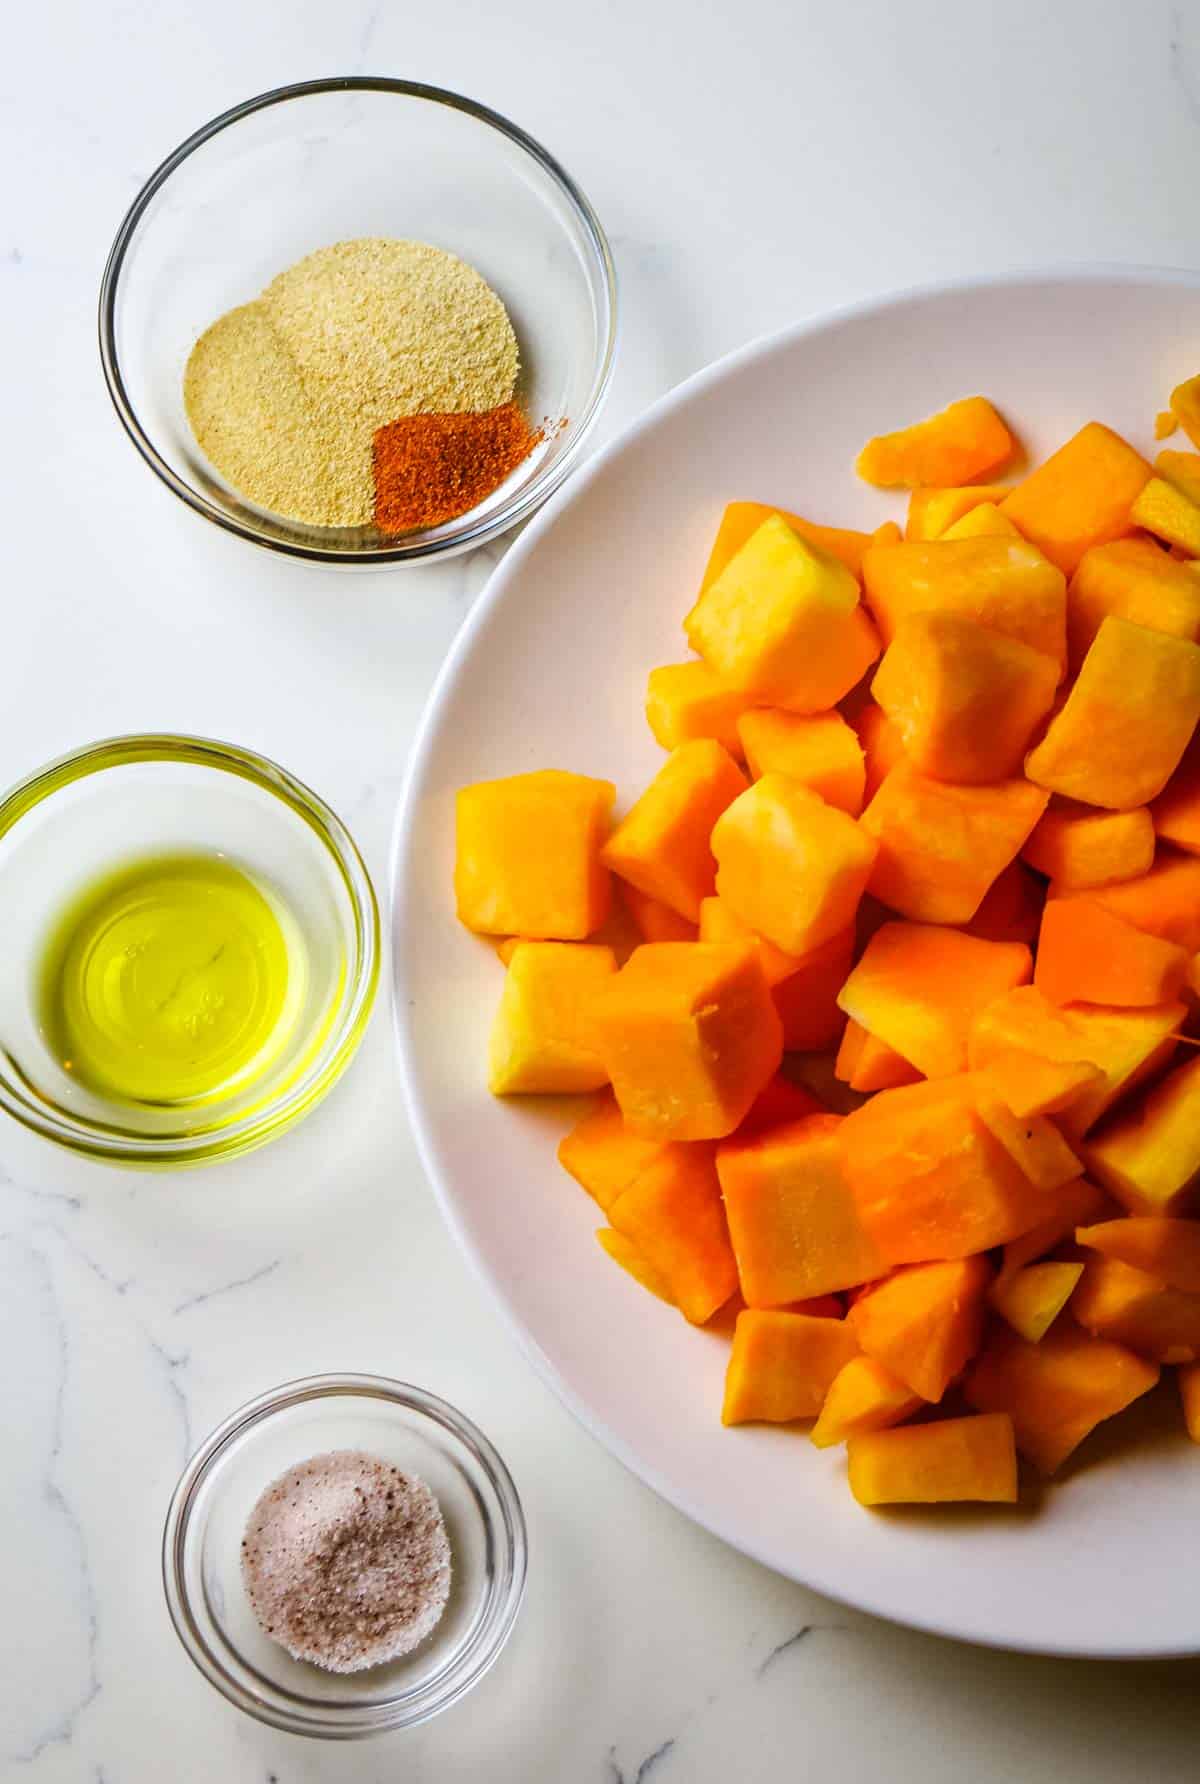 butternut squash with oil and seasonings on the side.